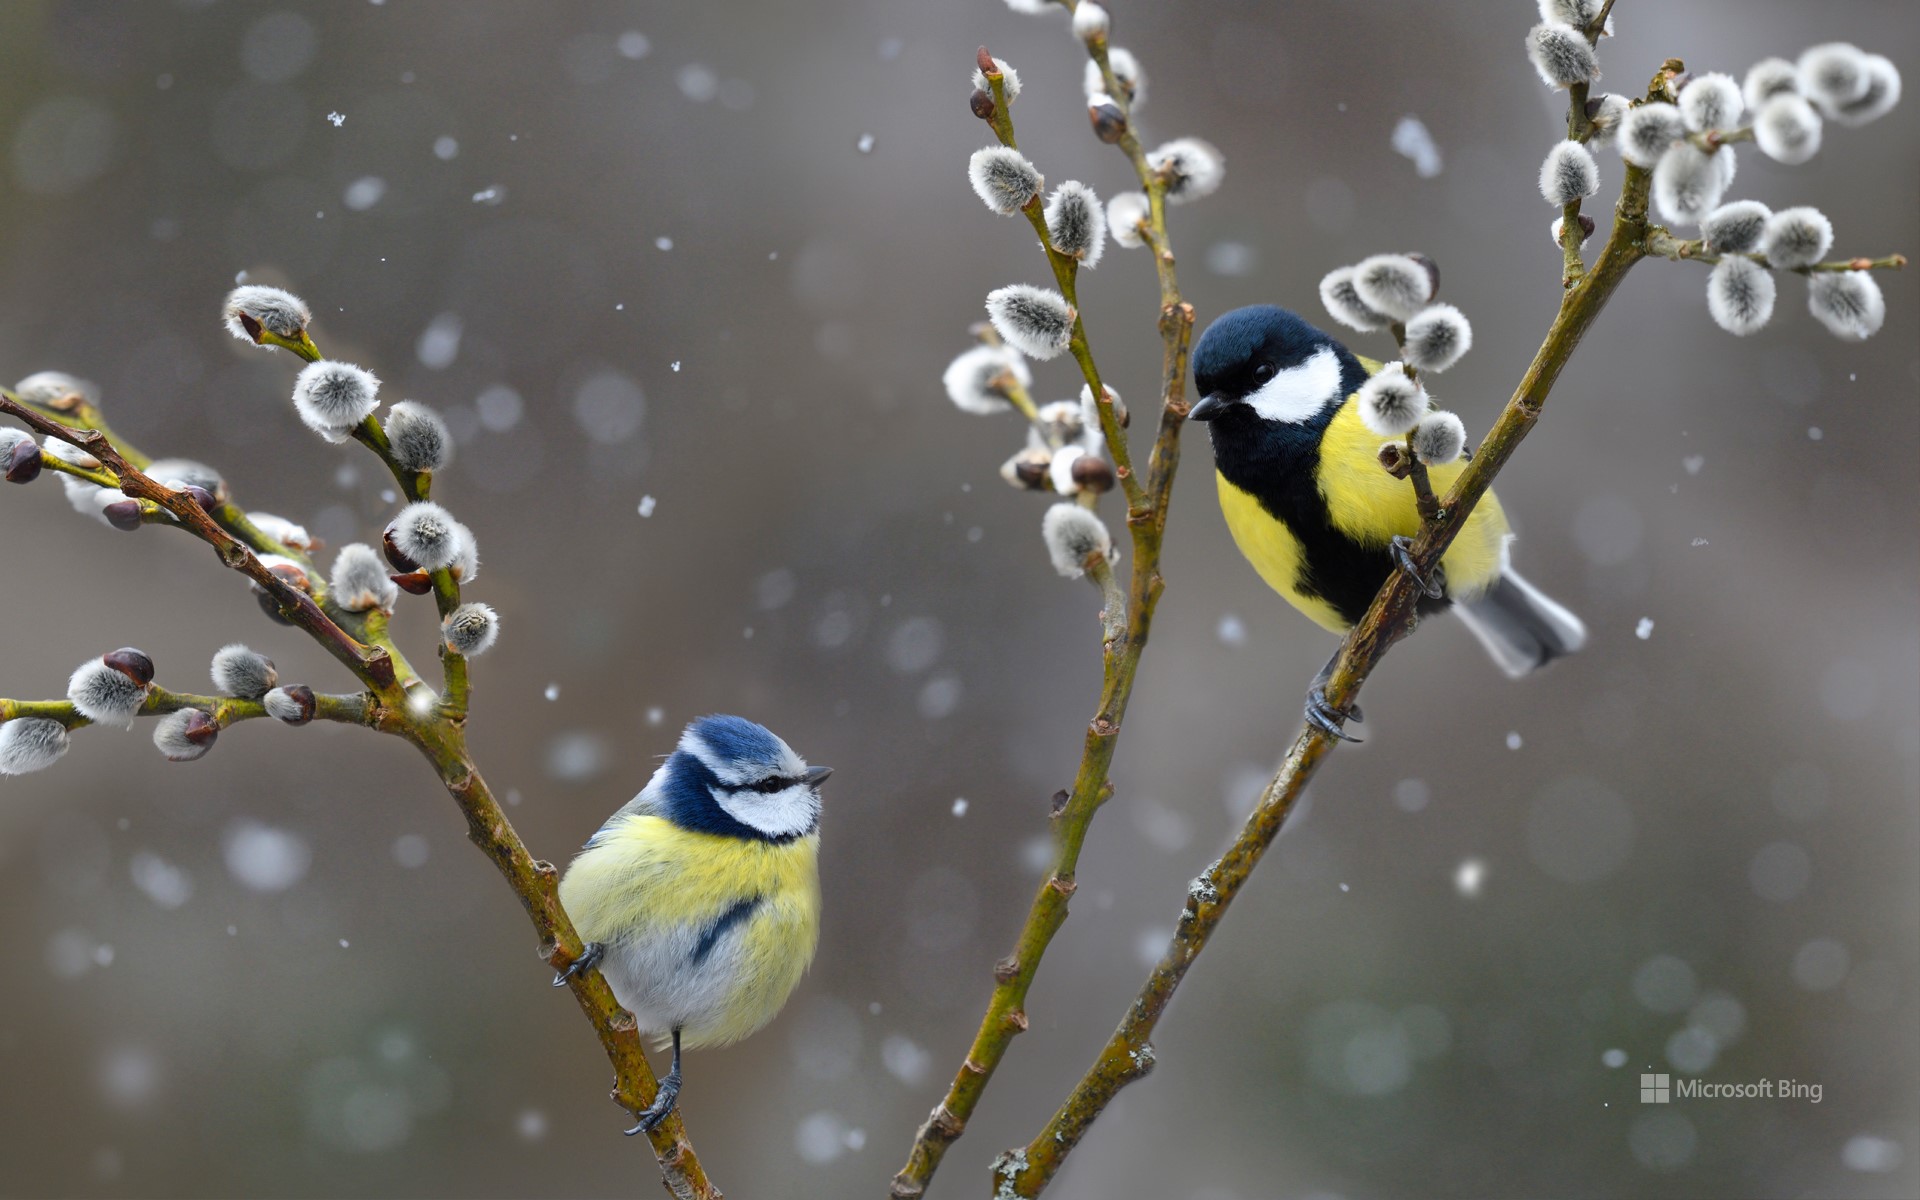 Blue tit (left) and great tit in snowfall, Northern Vosges Regional Nature Park, France